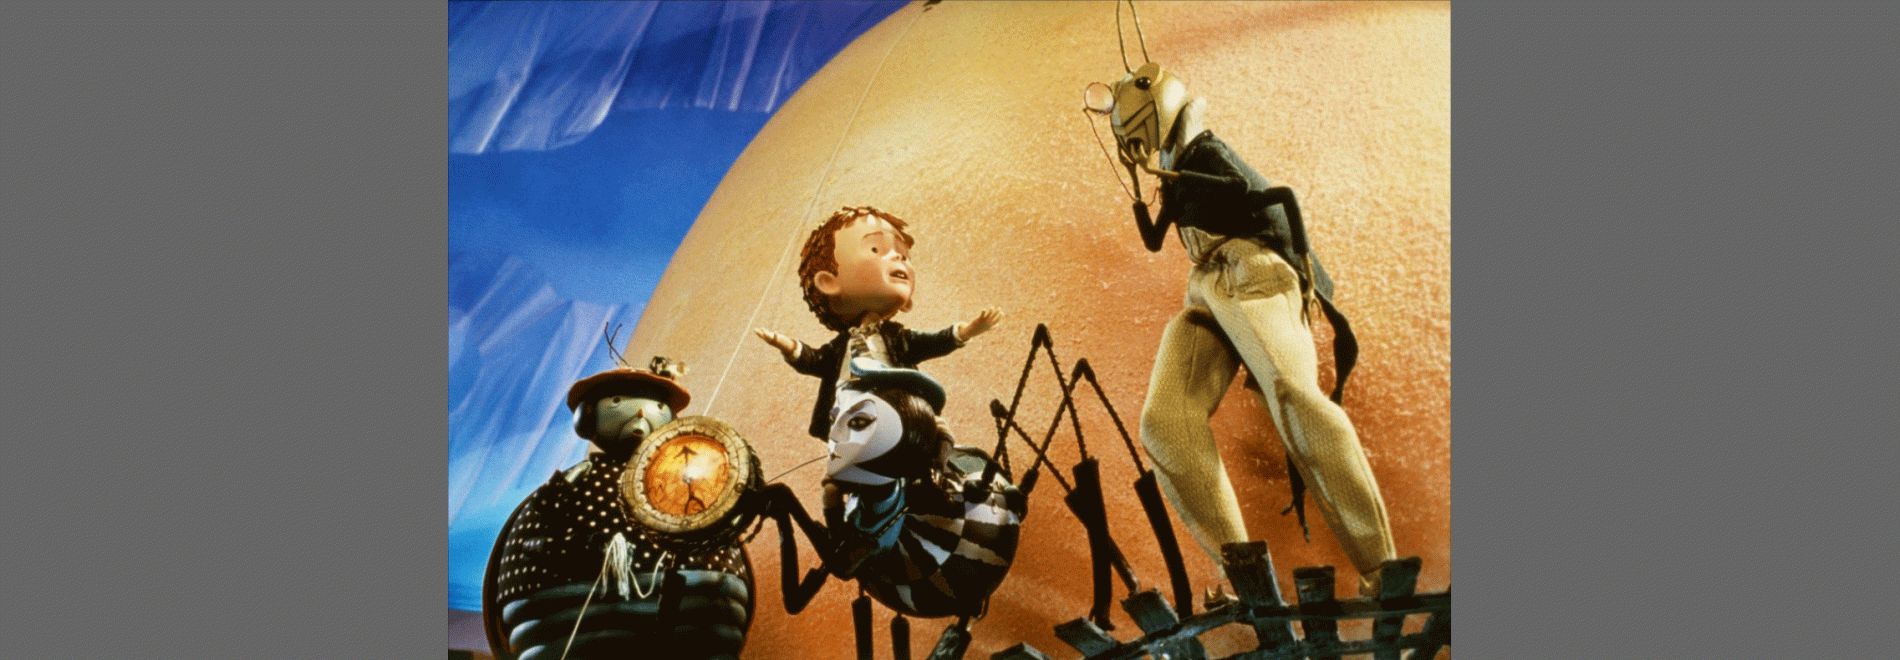 James and the Giant Peach (Henry Selick, 1996)